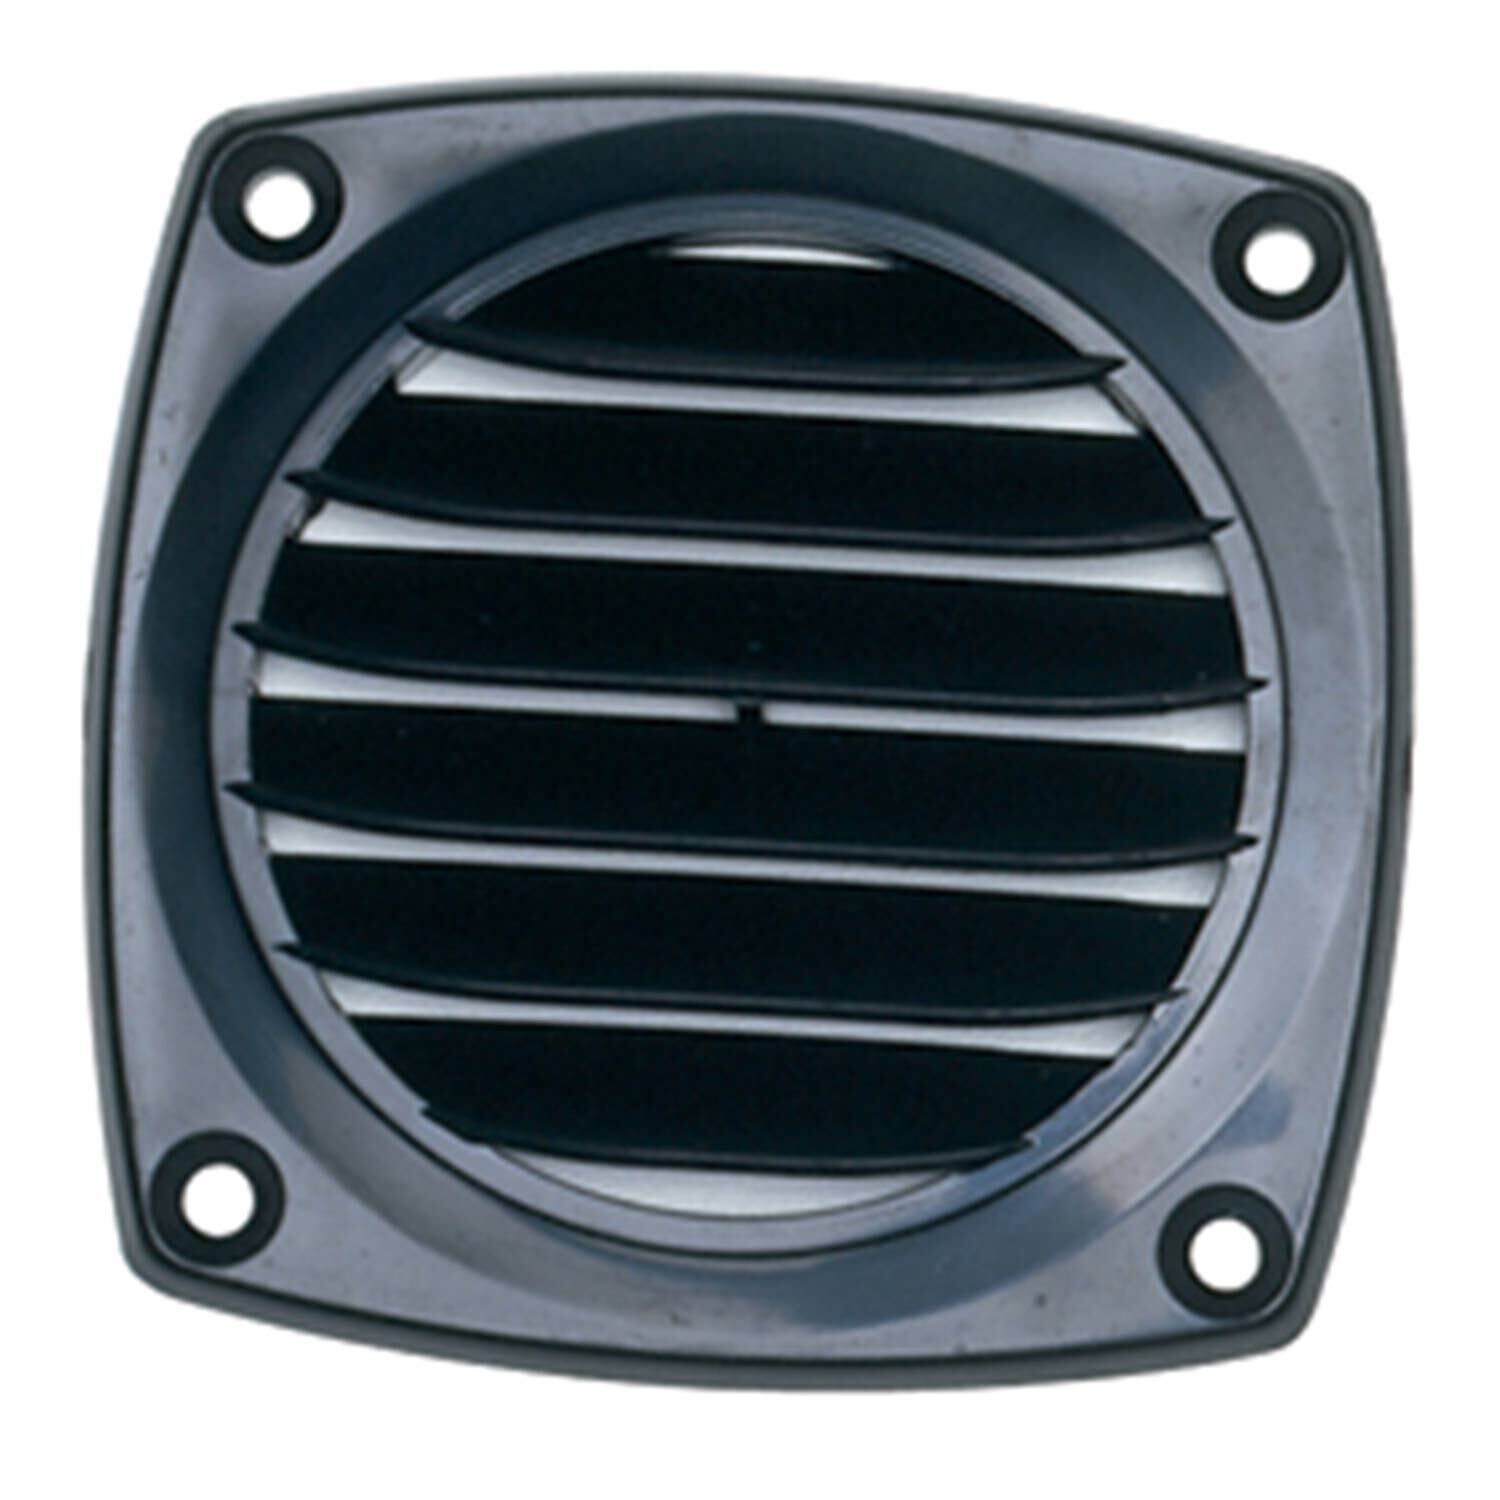 3 Inch Plastic Boat Hose Vent Cover for Marine Yachts 